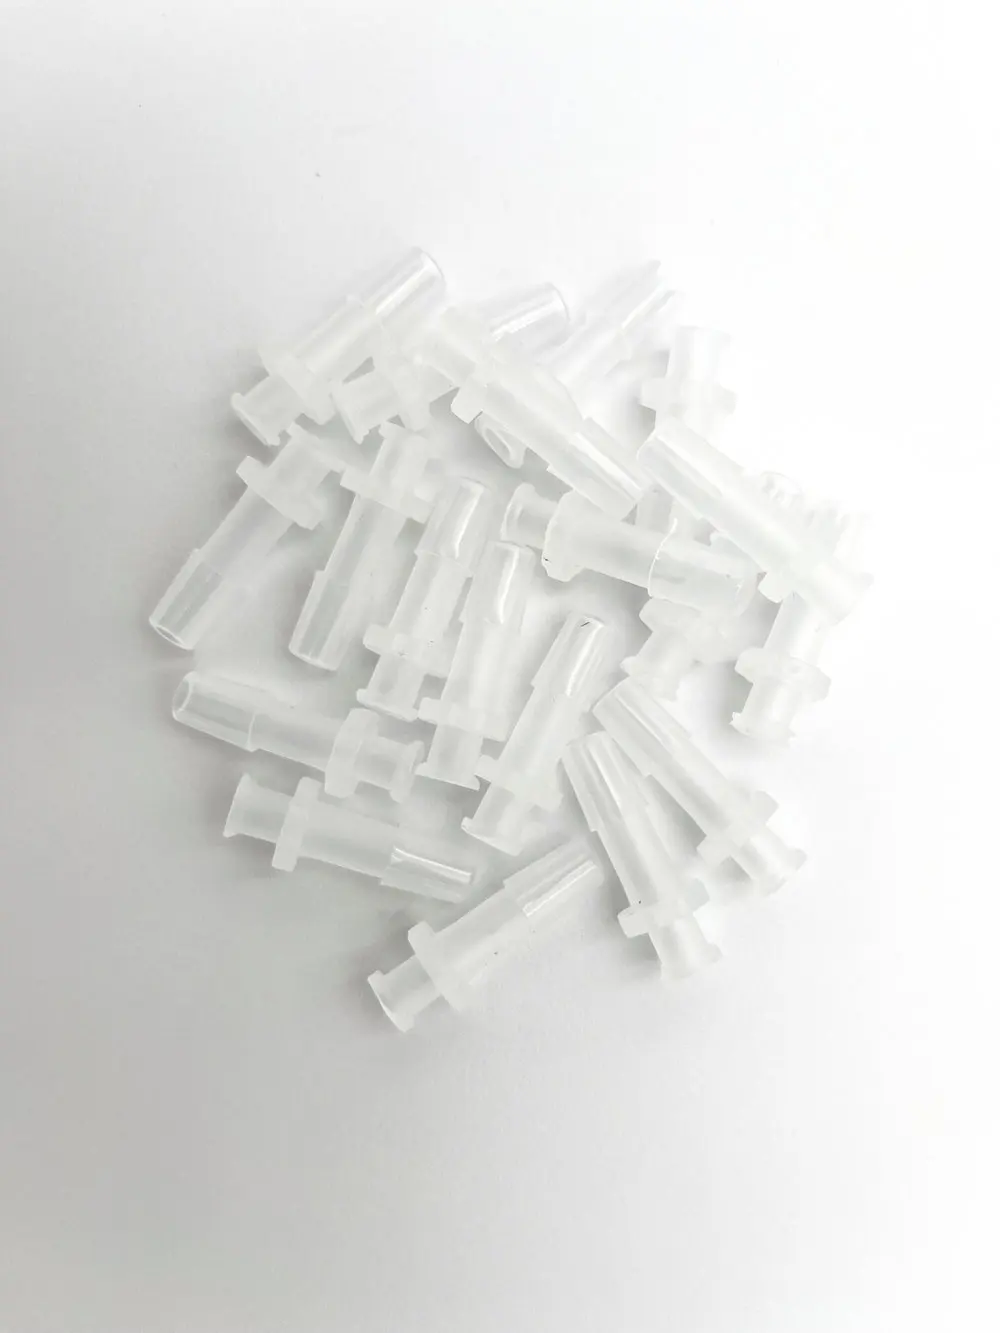 50pcs/lot 1/4inch-Barb Female or Male Luer Tapered Syringe Fitting (polyprop) ,Luer Lock  Tapered Connector